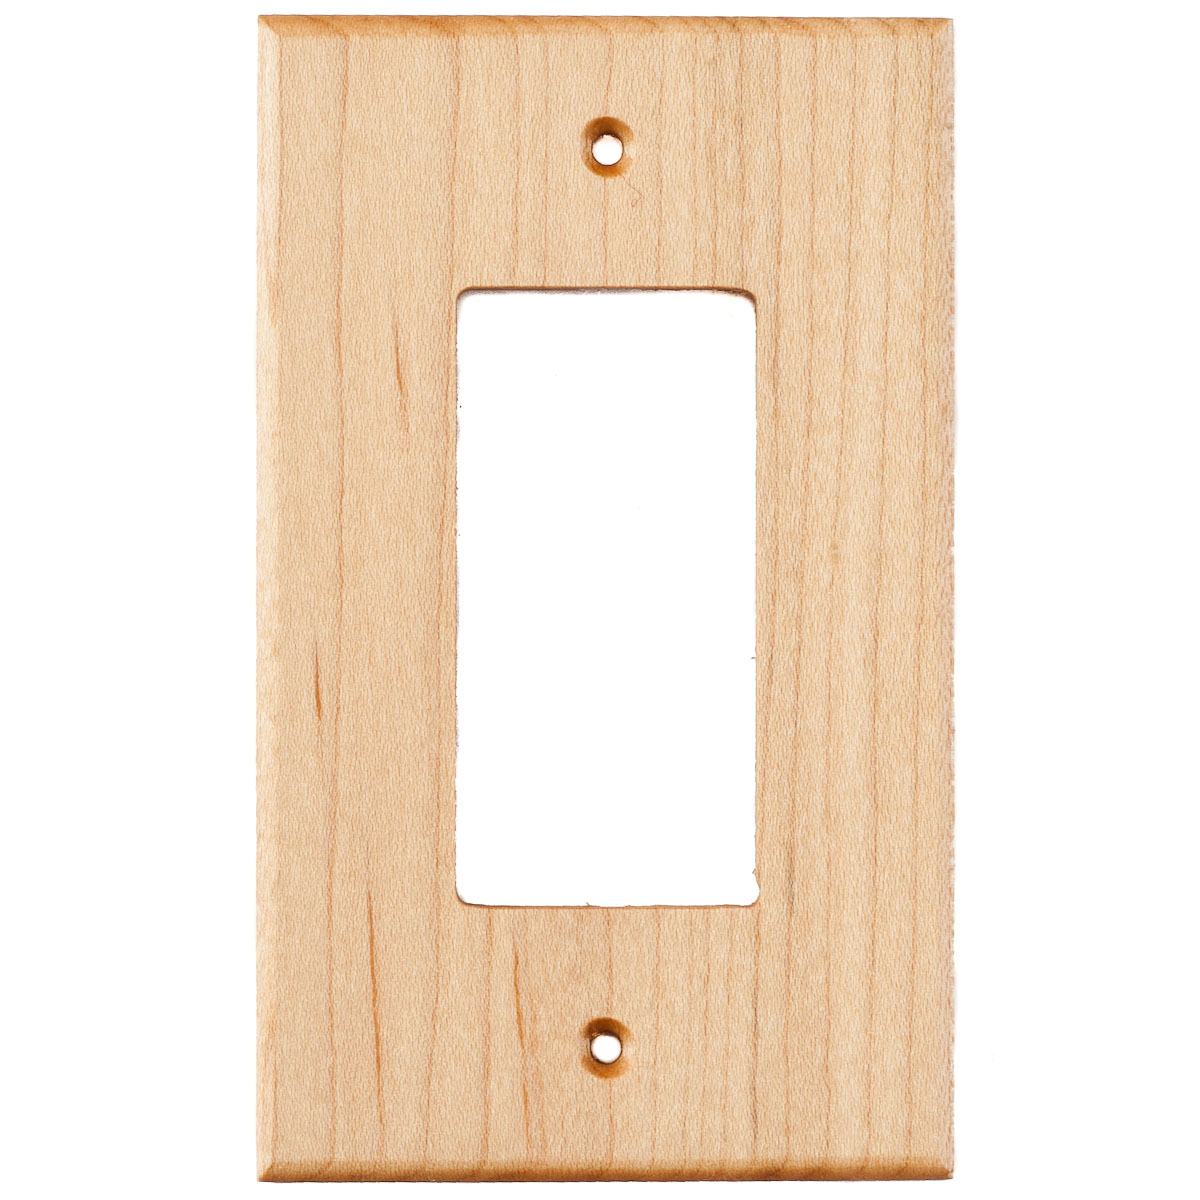 Maple Wood Wall Plate - 1 Gang GFCI Outlet Cover - Virgin Timber